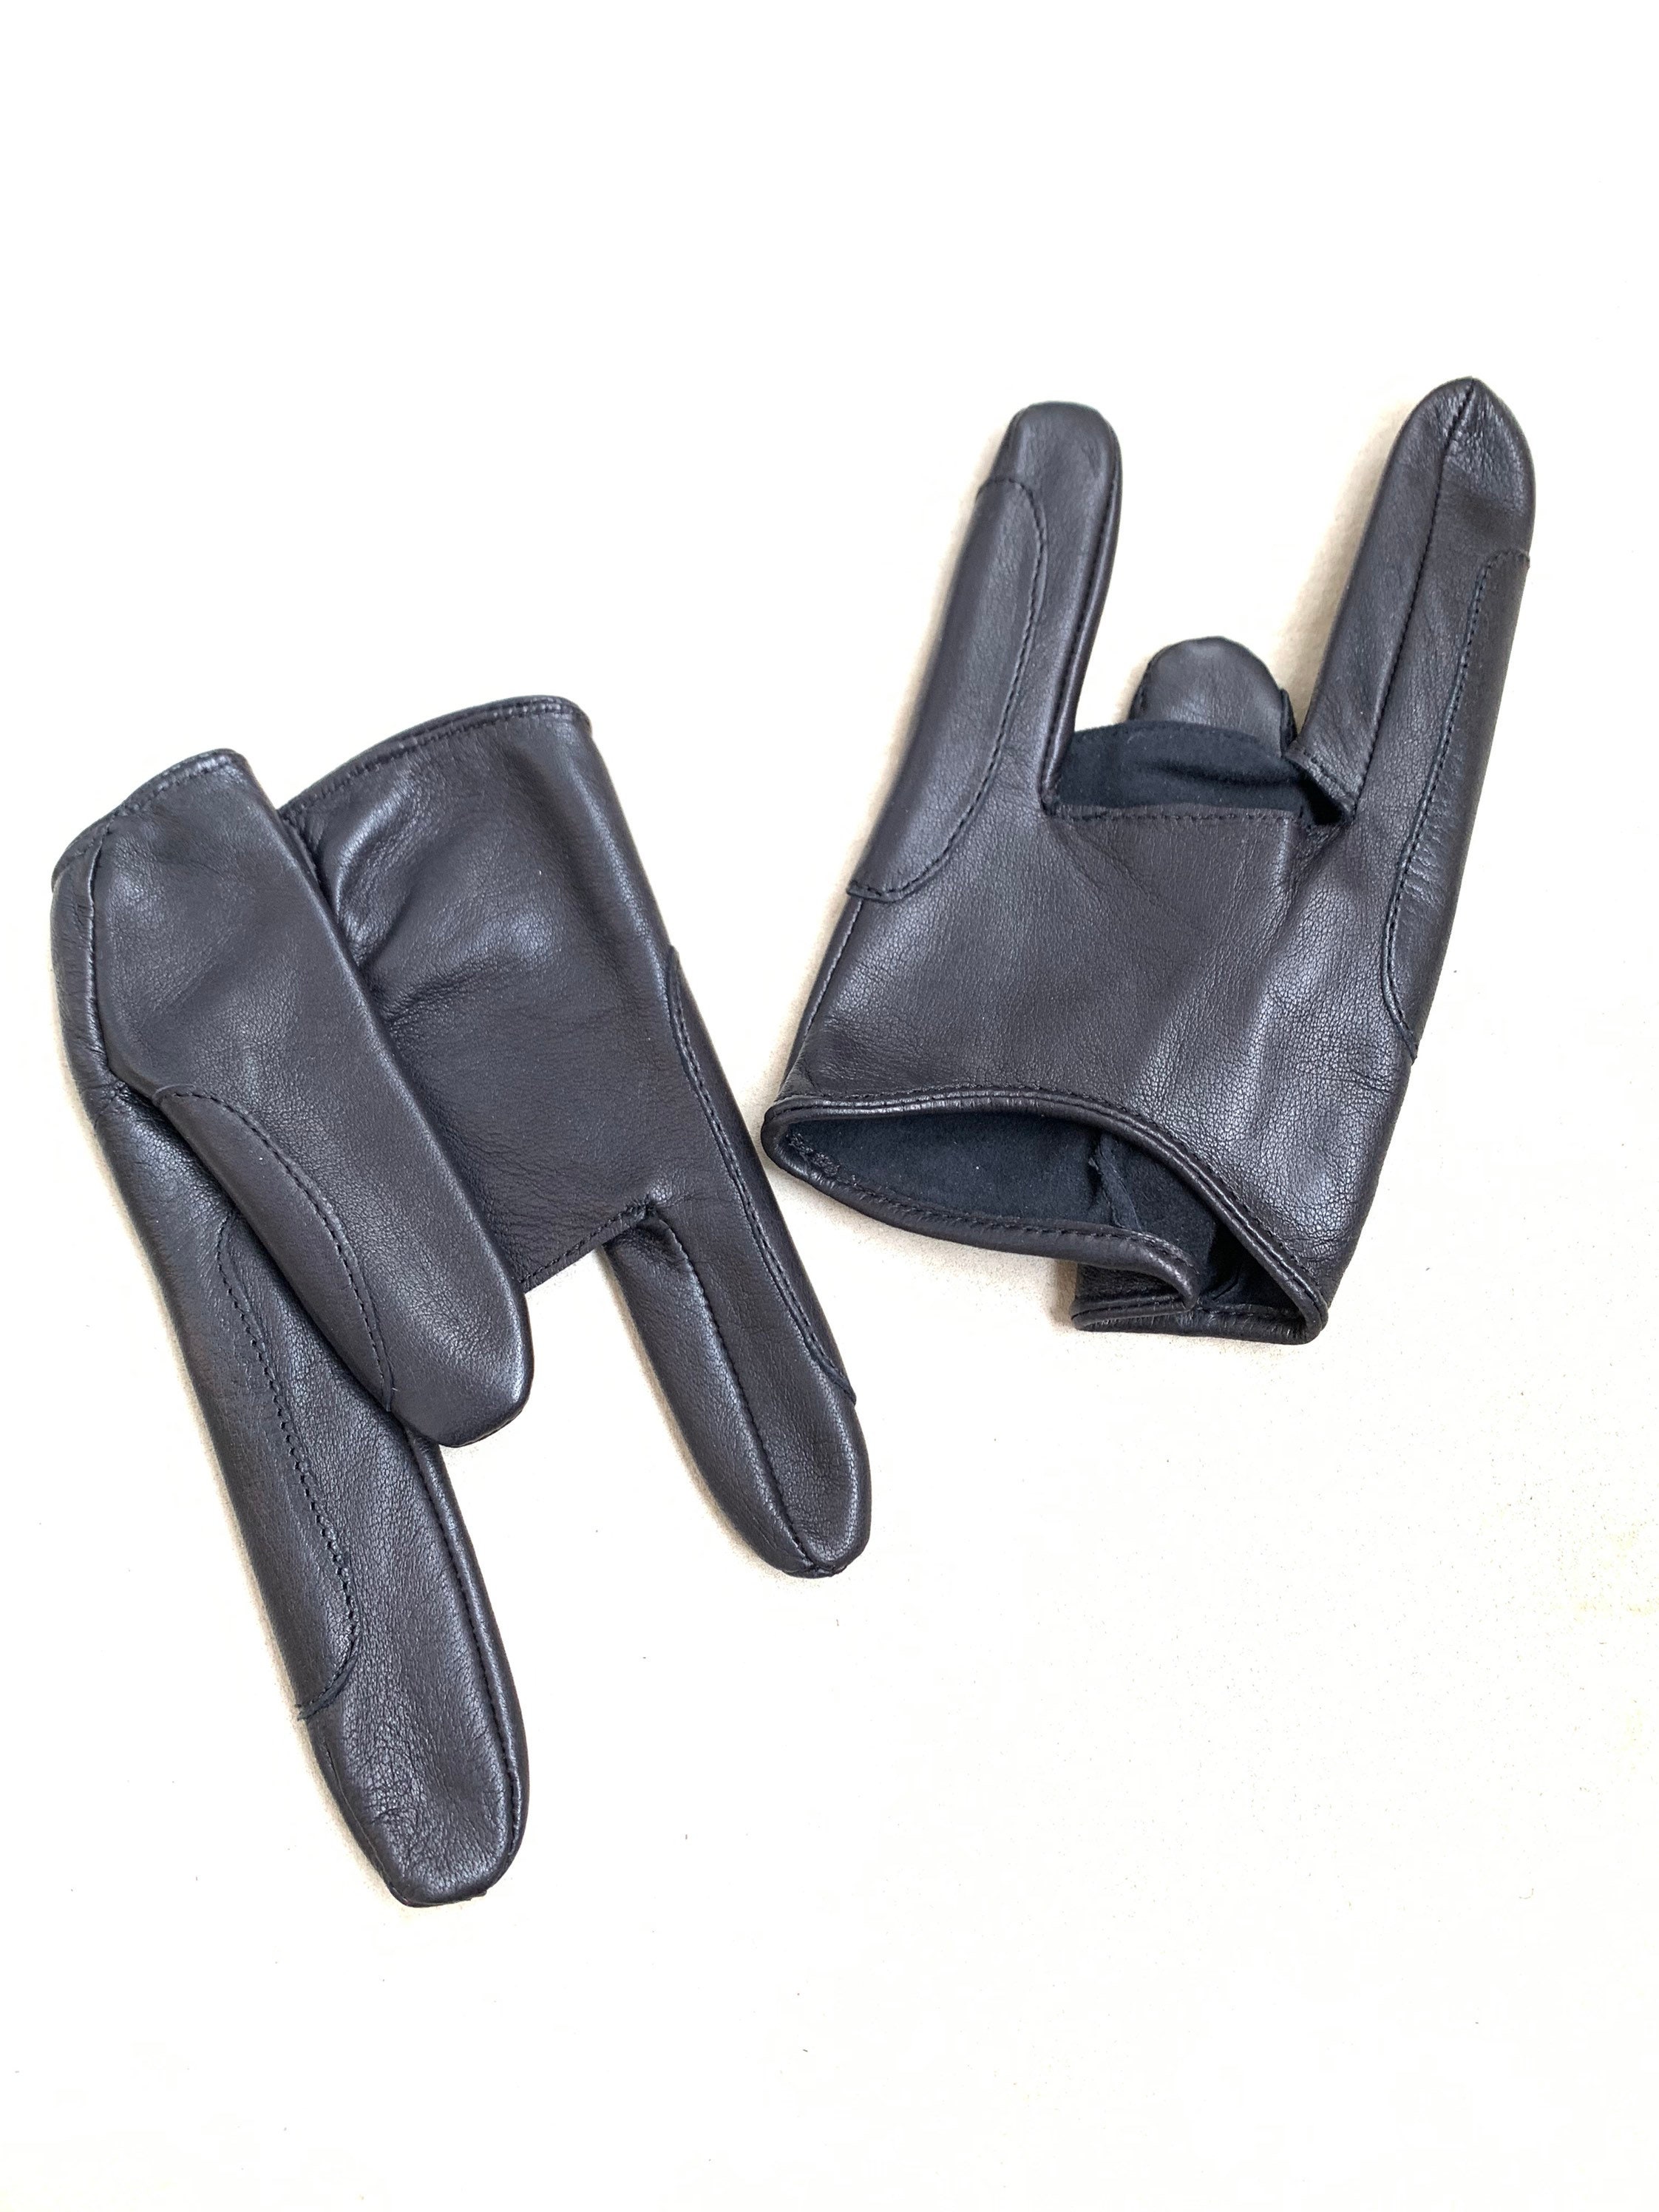 Ladies Fingerless Leather Gloves With Gel Palm - SKU 8232-00-UN